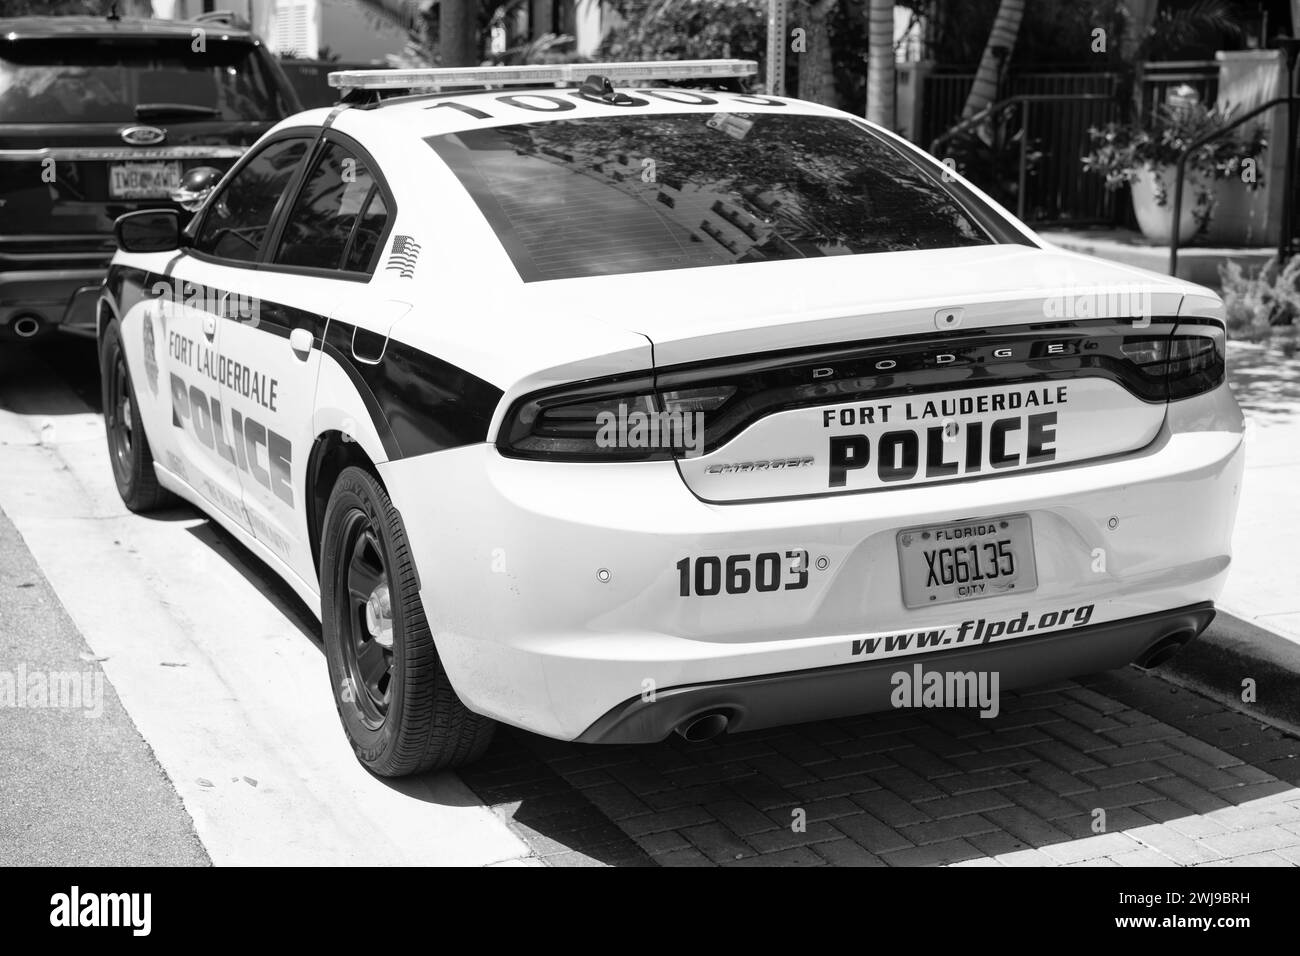 Miami, Florida USA - March 25, 2023: Dodge Charger police emergency car in miami fort lauderdale, back view Stock Photo